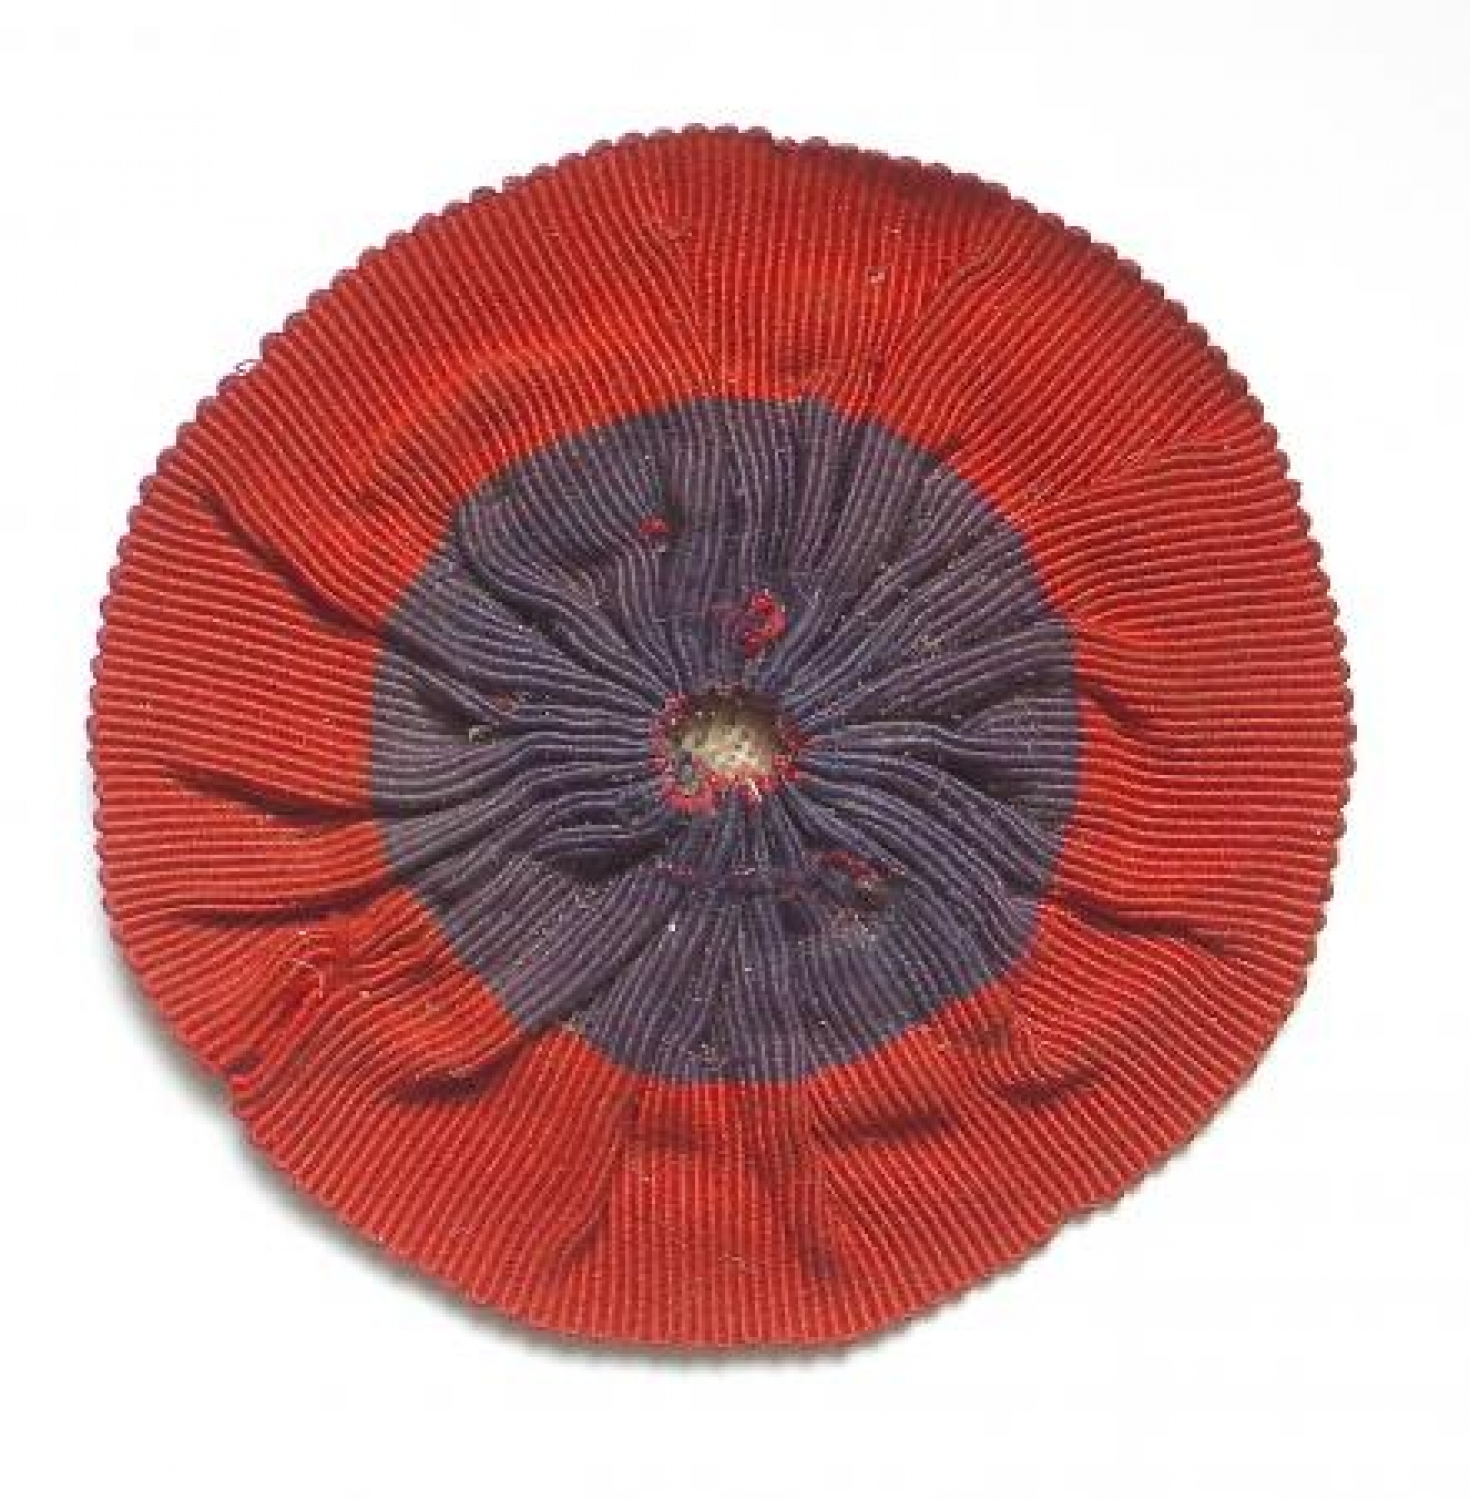 Imperial Yeomanry slouch hat rosette